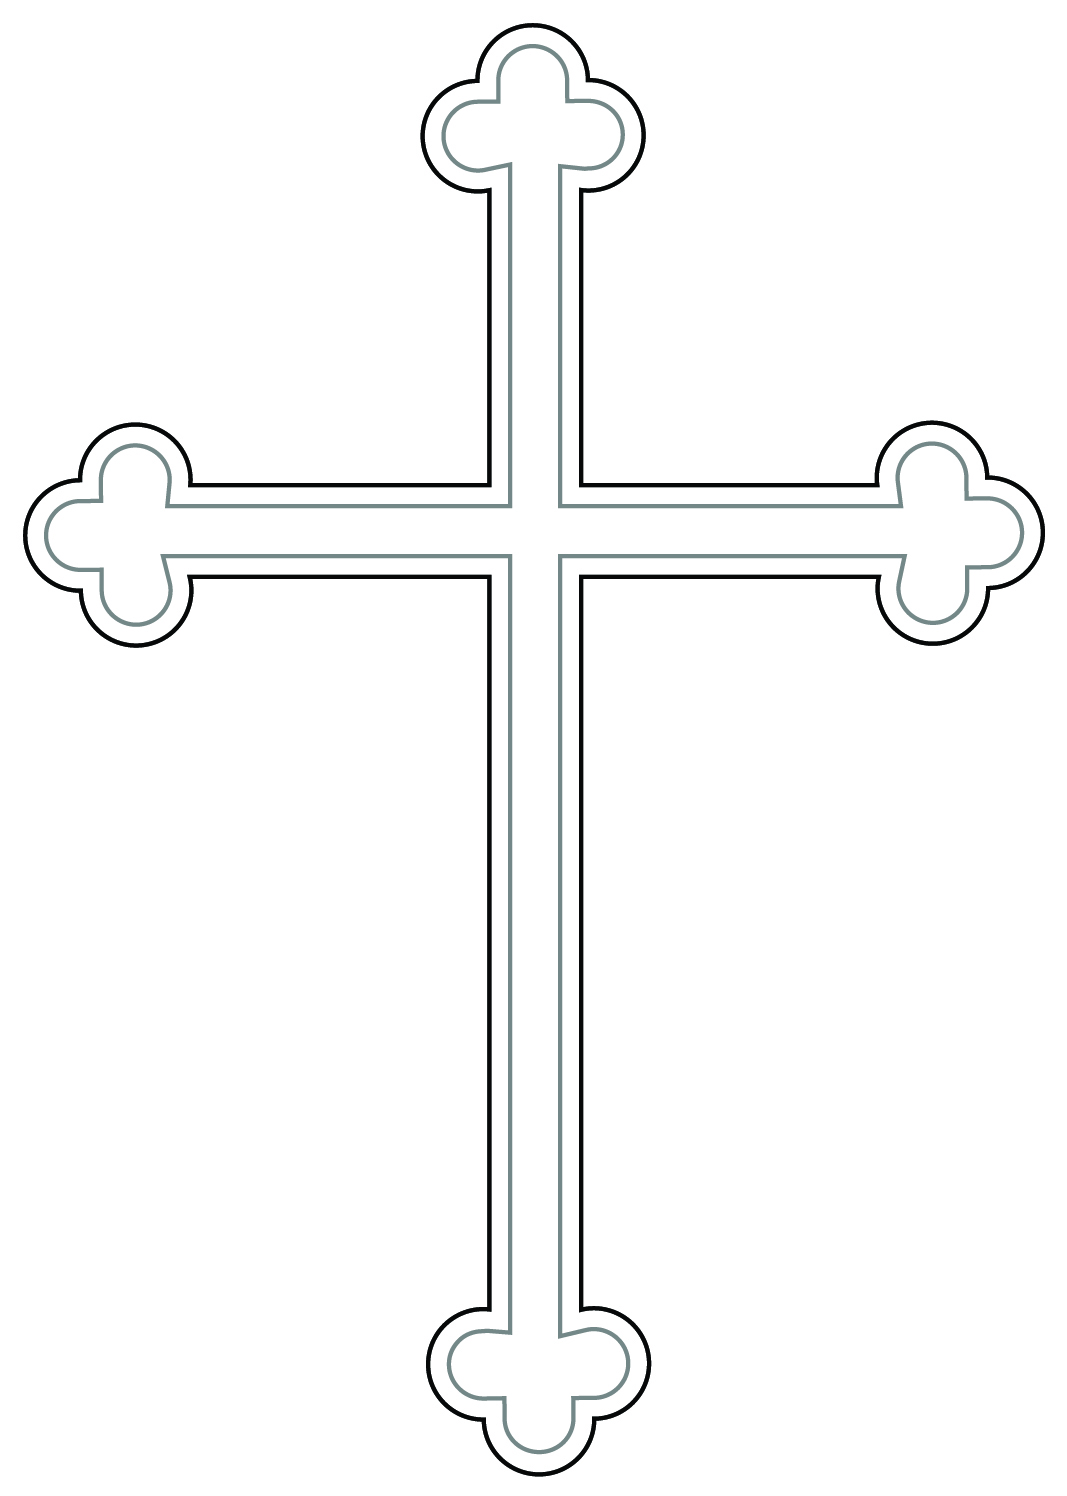 Baby Baptism Cross Clip Art Images  Pictures - Becuo